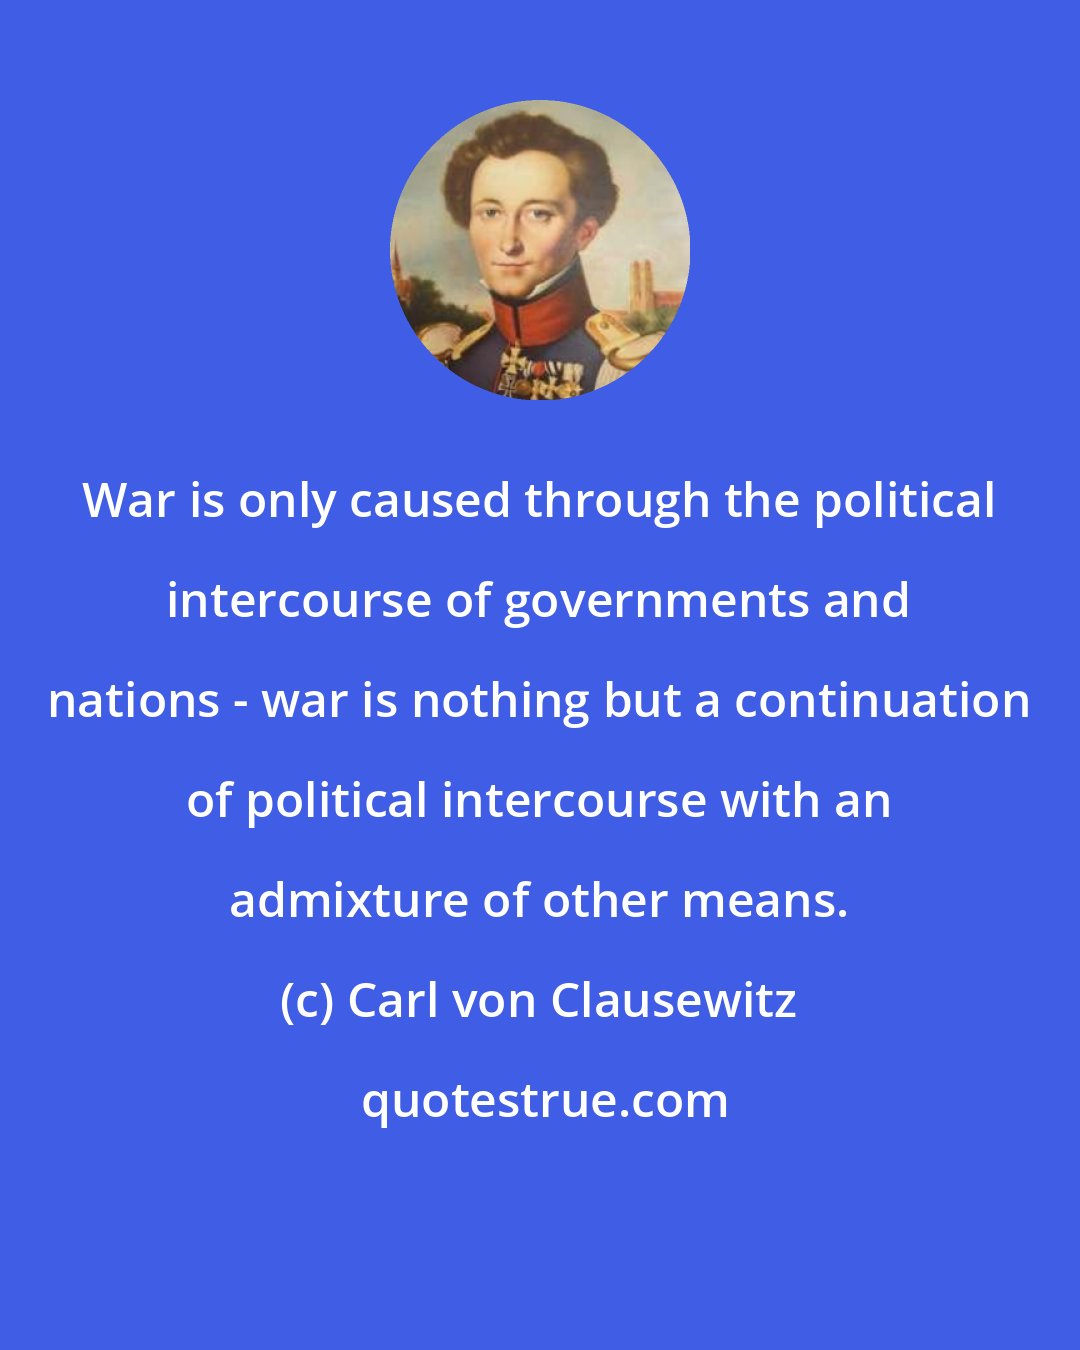 Carl von Clausewitz: War is only caused through the political intercourse of governments and nations - war is nothing but a continuation of political intercourse with an admixture of other means.